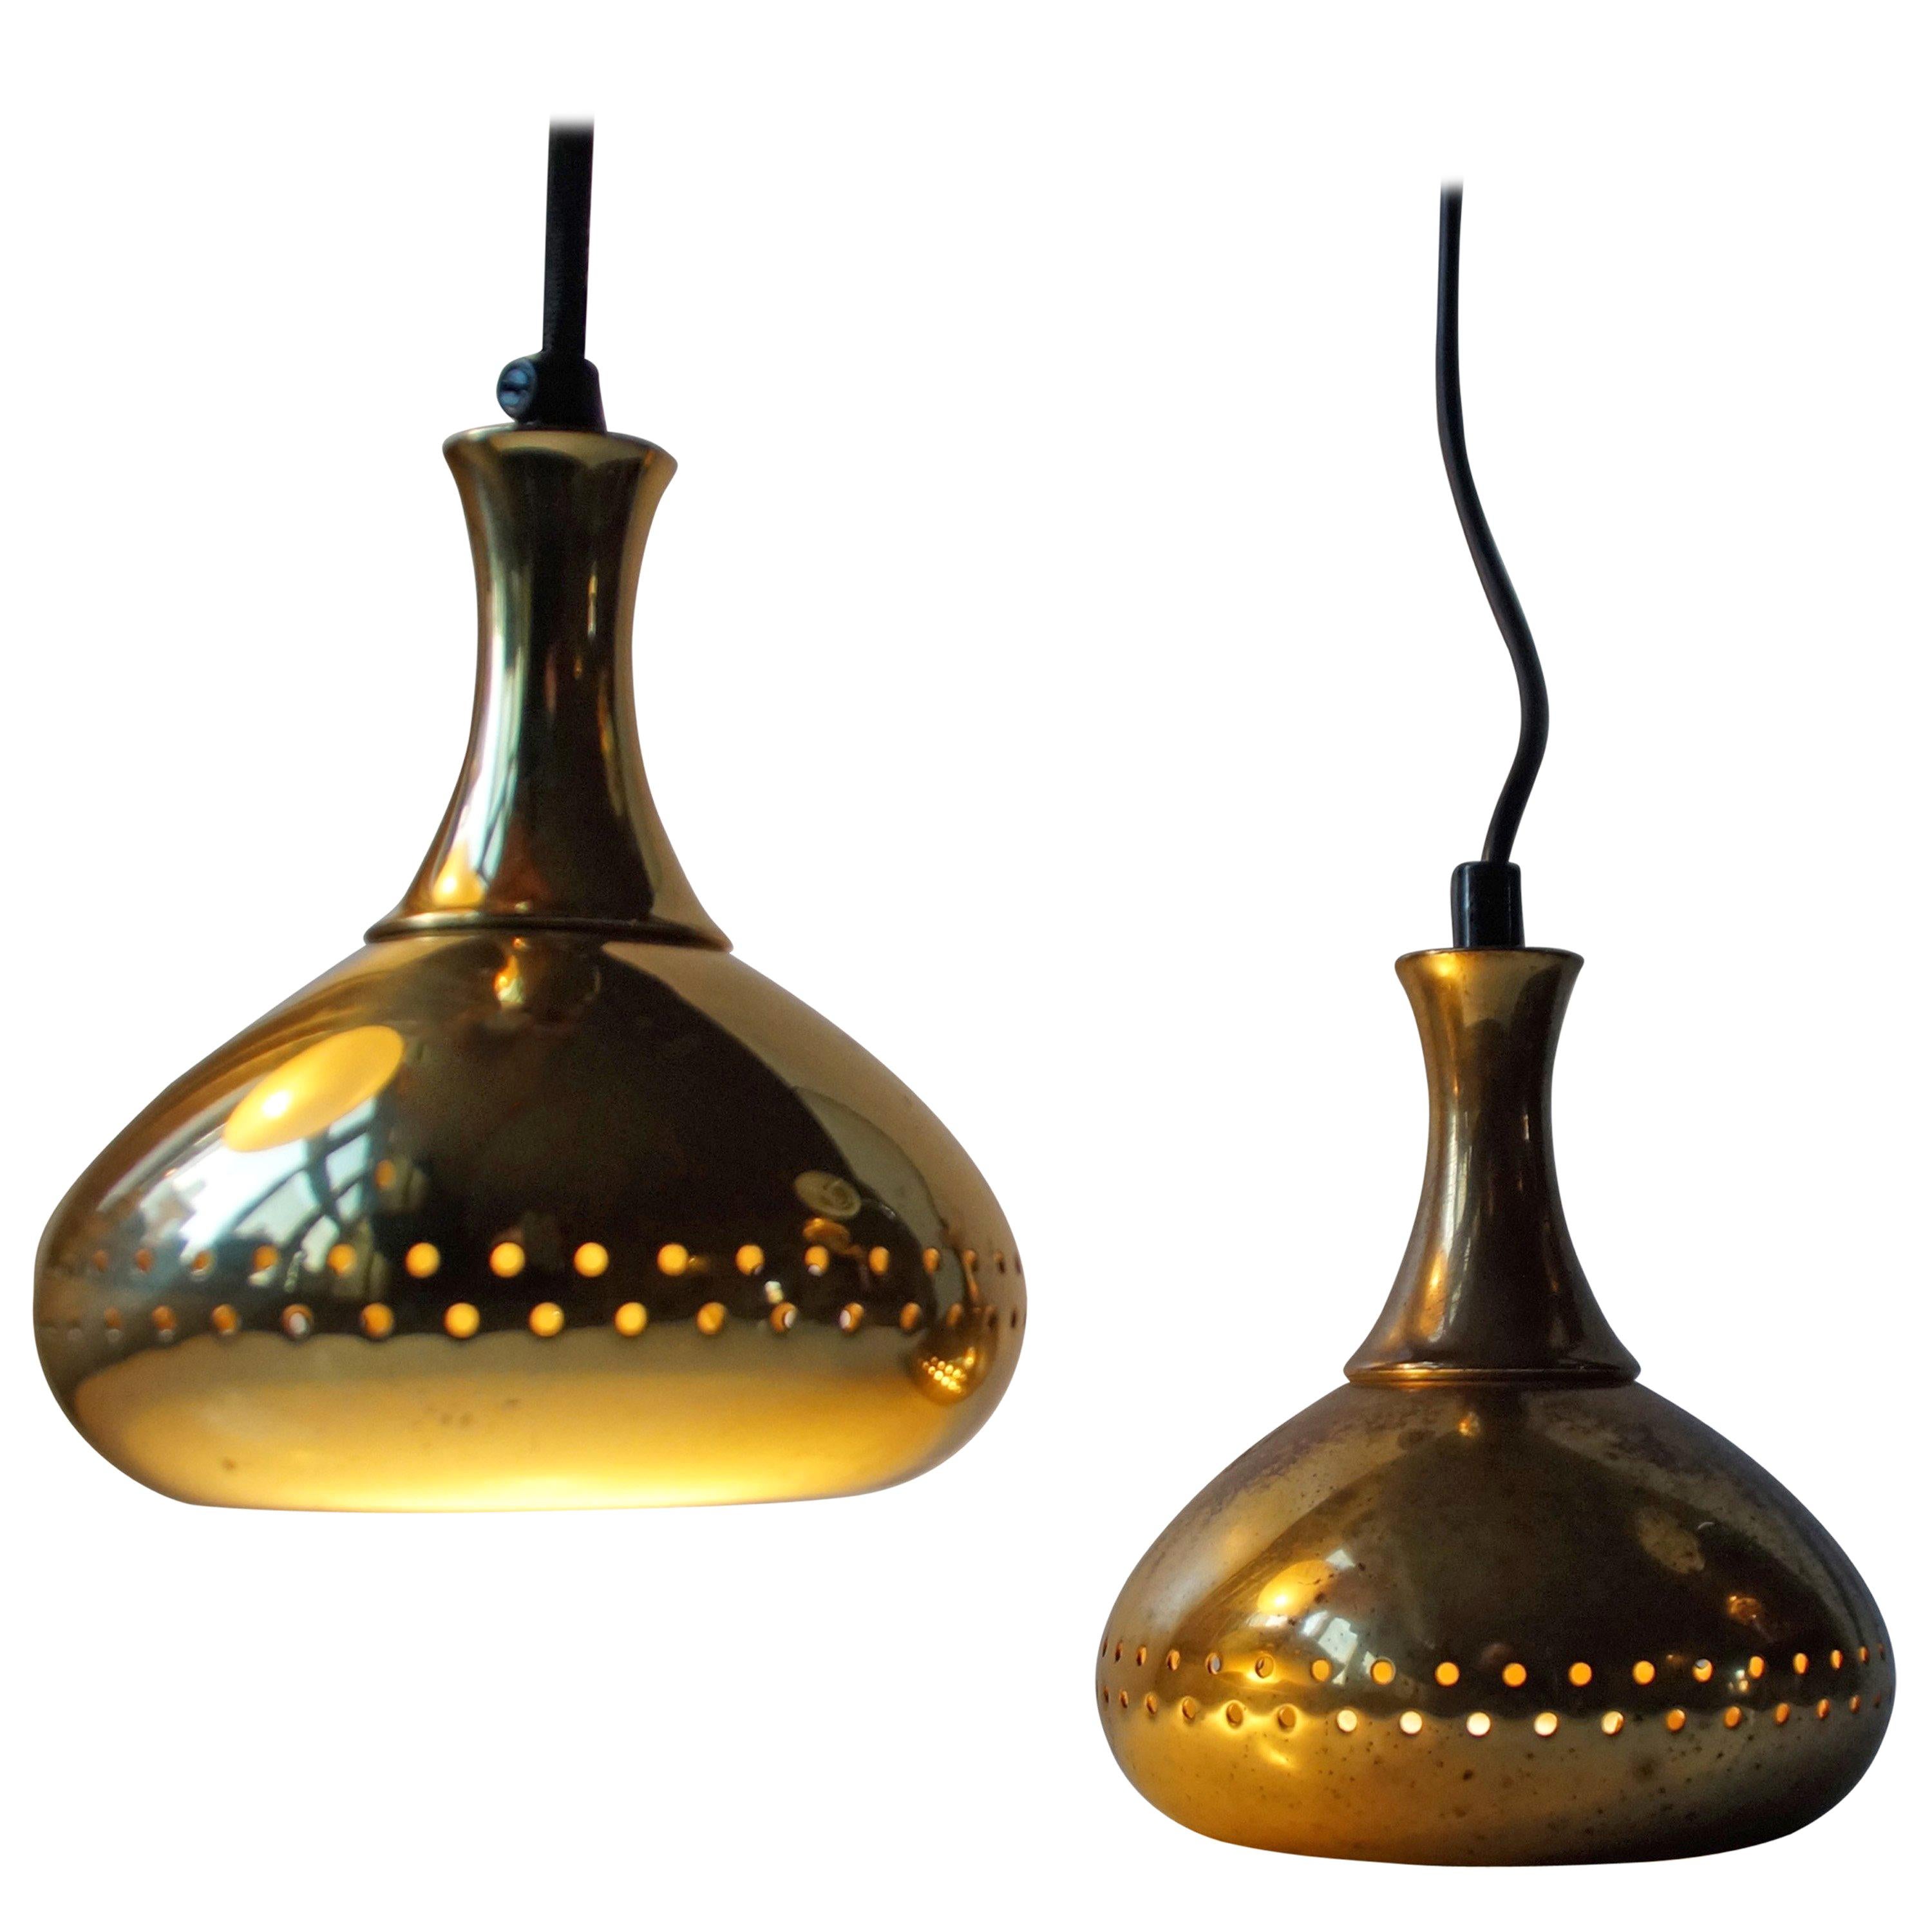 Pair of Small Brass Pendant Lamps by Hans-Agne Jakobsson for Markaryd AB